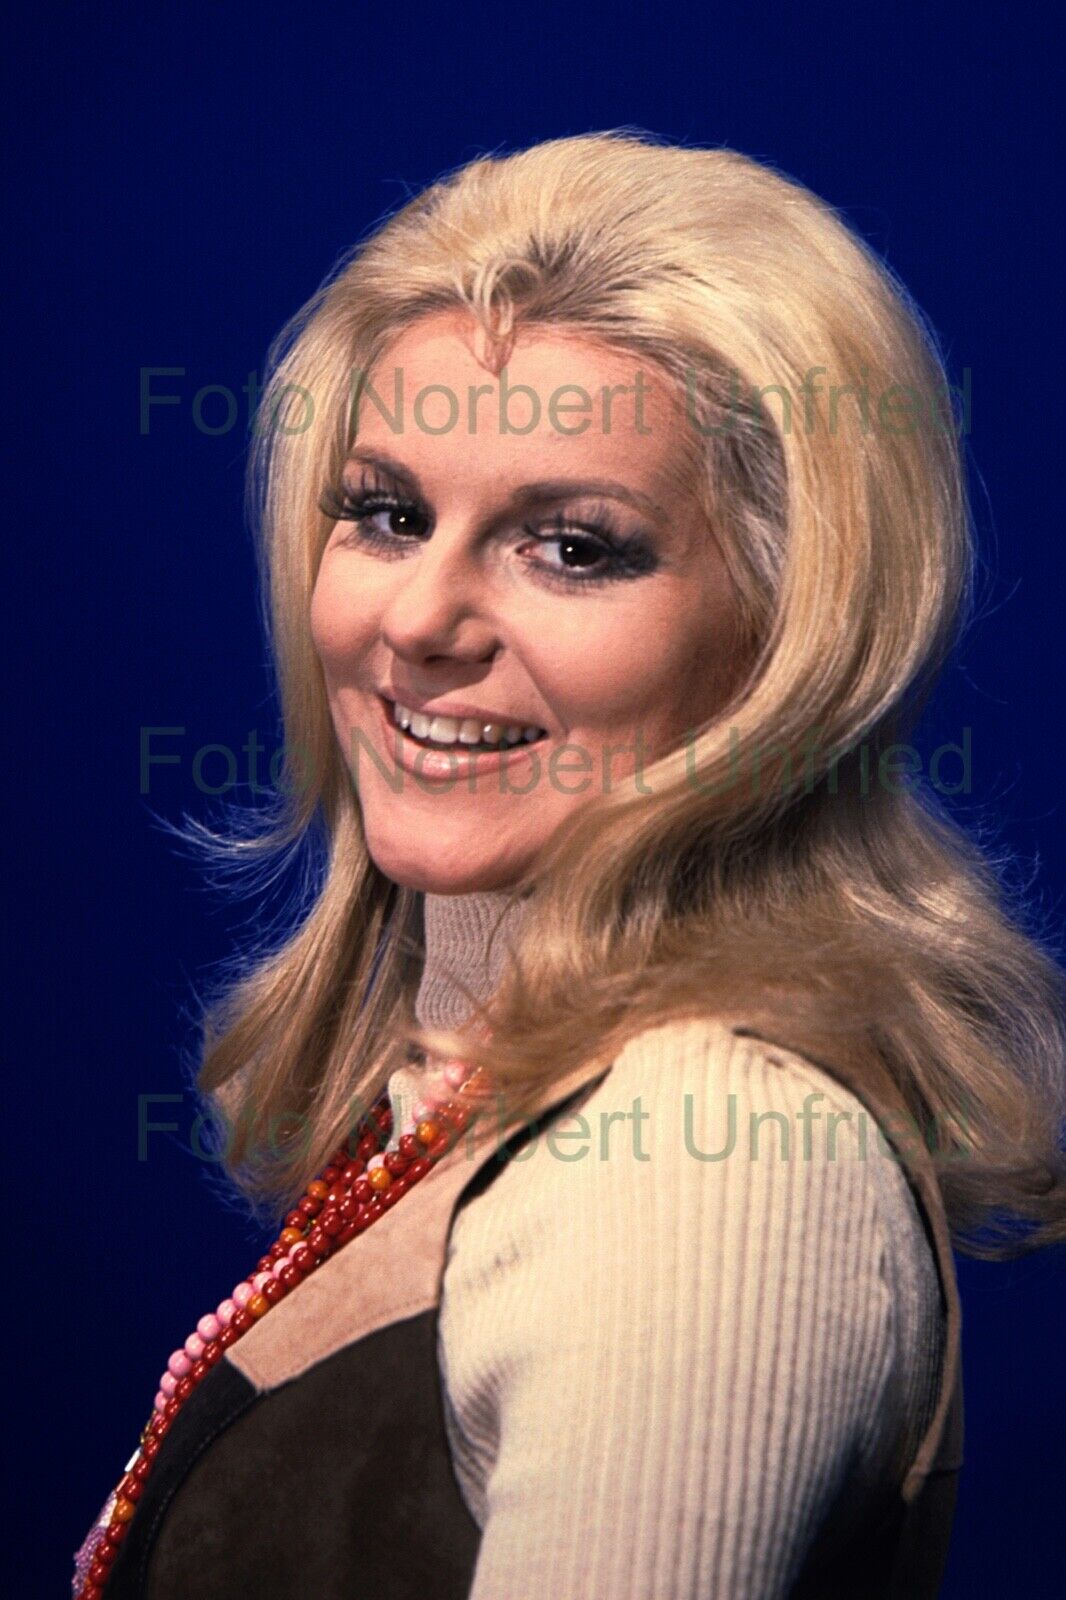 Peggy March 10 X 15 CM Photo Poster painting Without Autograph (Star-34